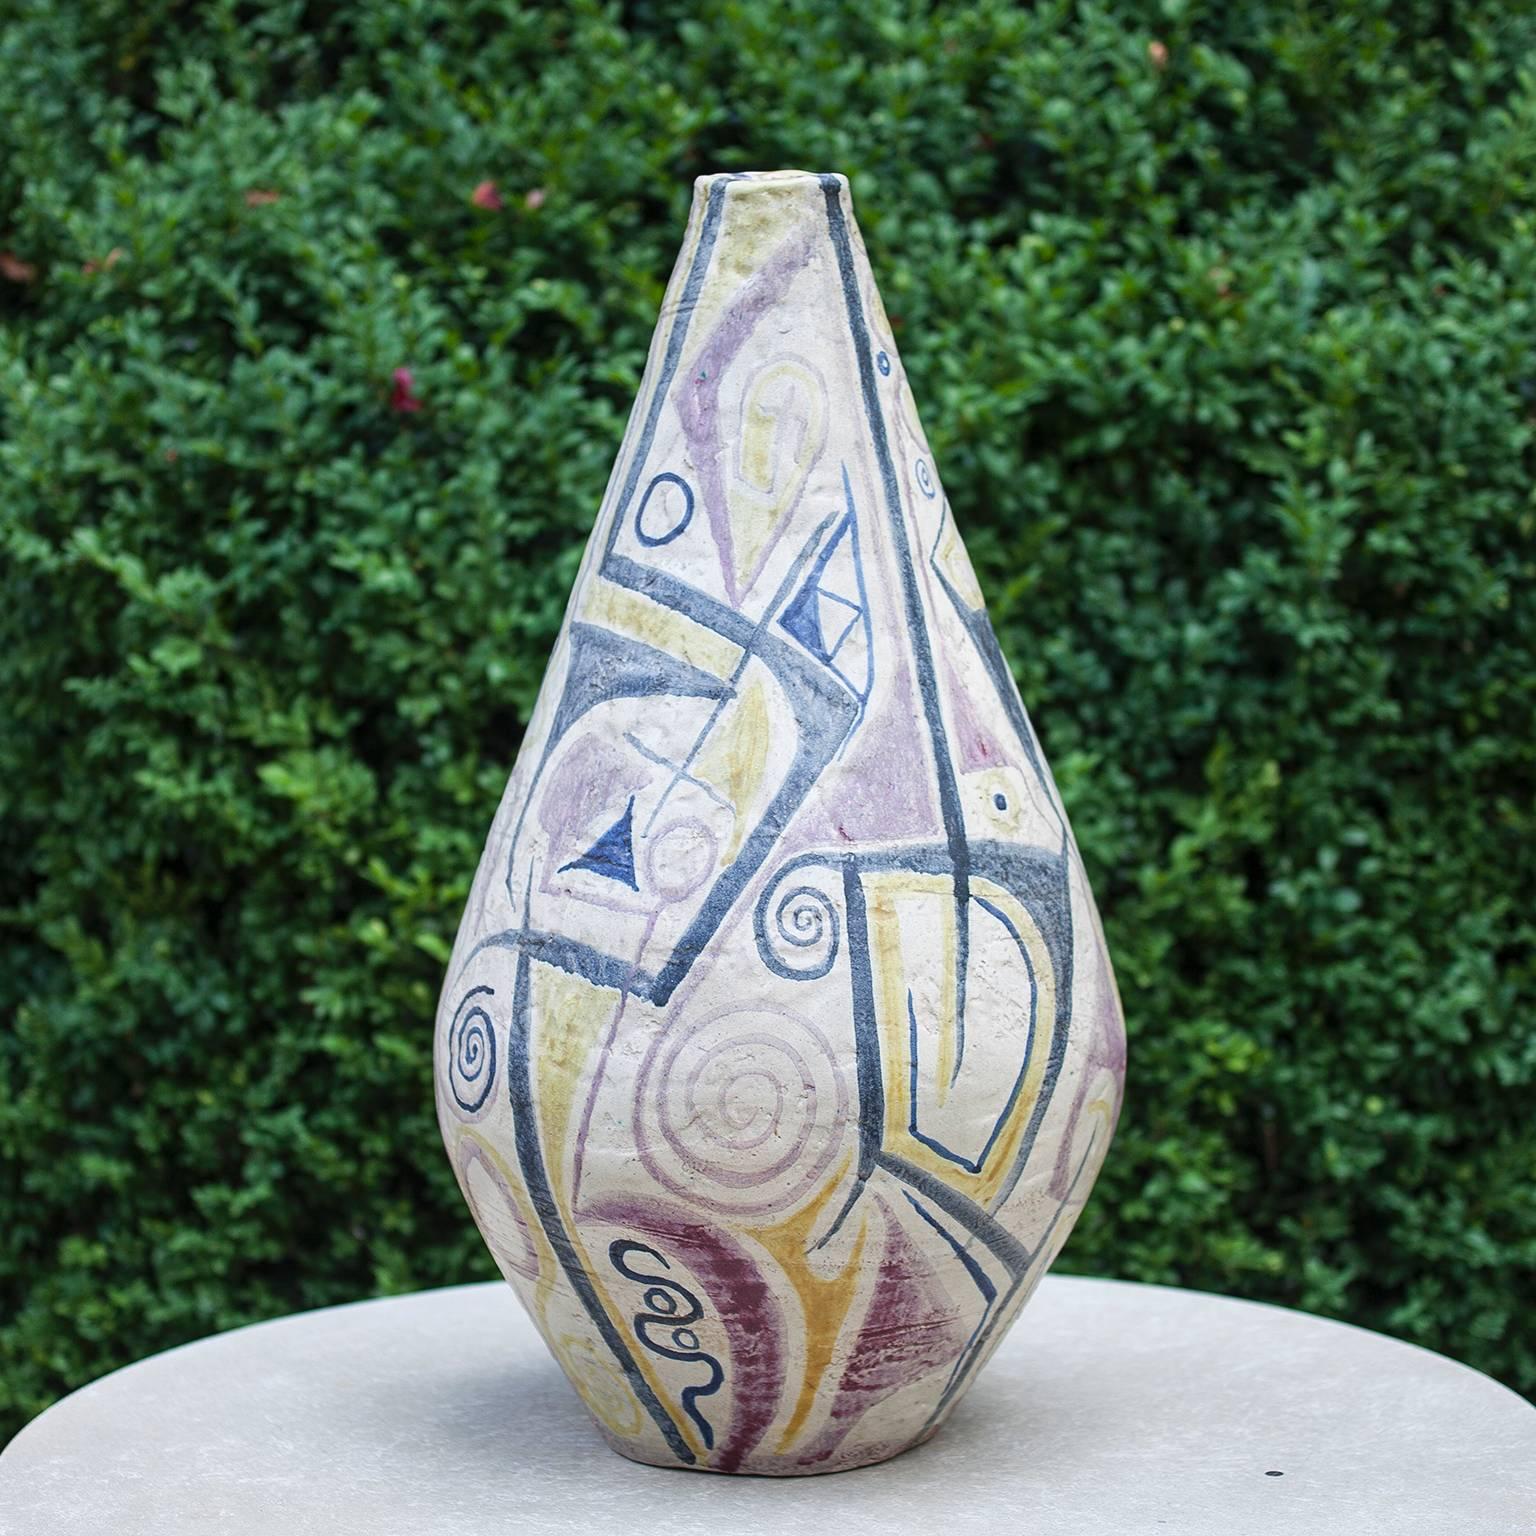 Very huge German Art Pottery ceramic vase by Roman Elsold, Germany, 1958.
Roman Elsold was a student at the Art Academy in Munich in the late 1950.
Unique piece by the artist for an exhibition of the 